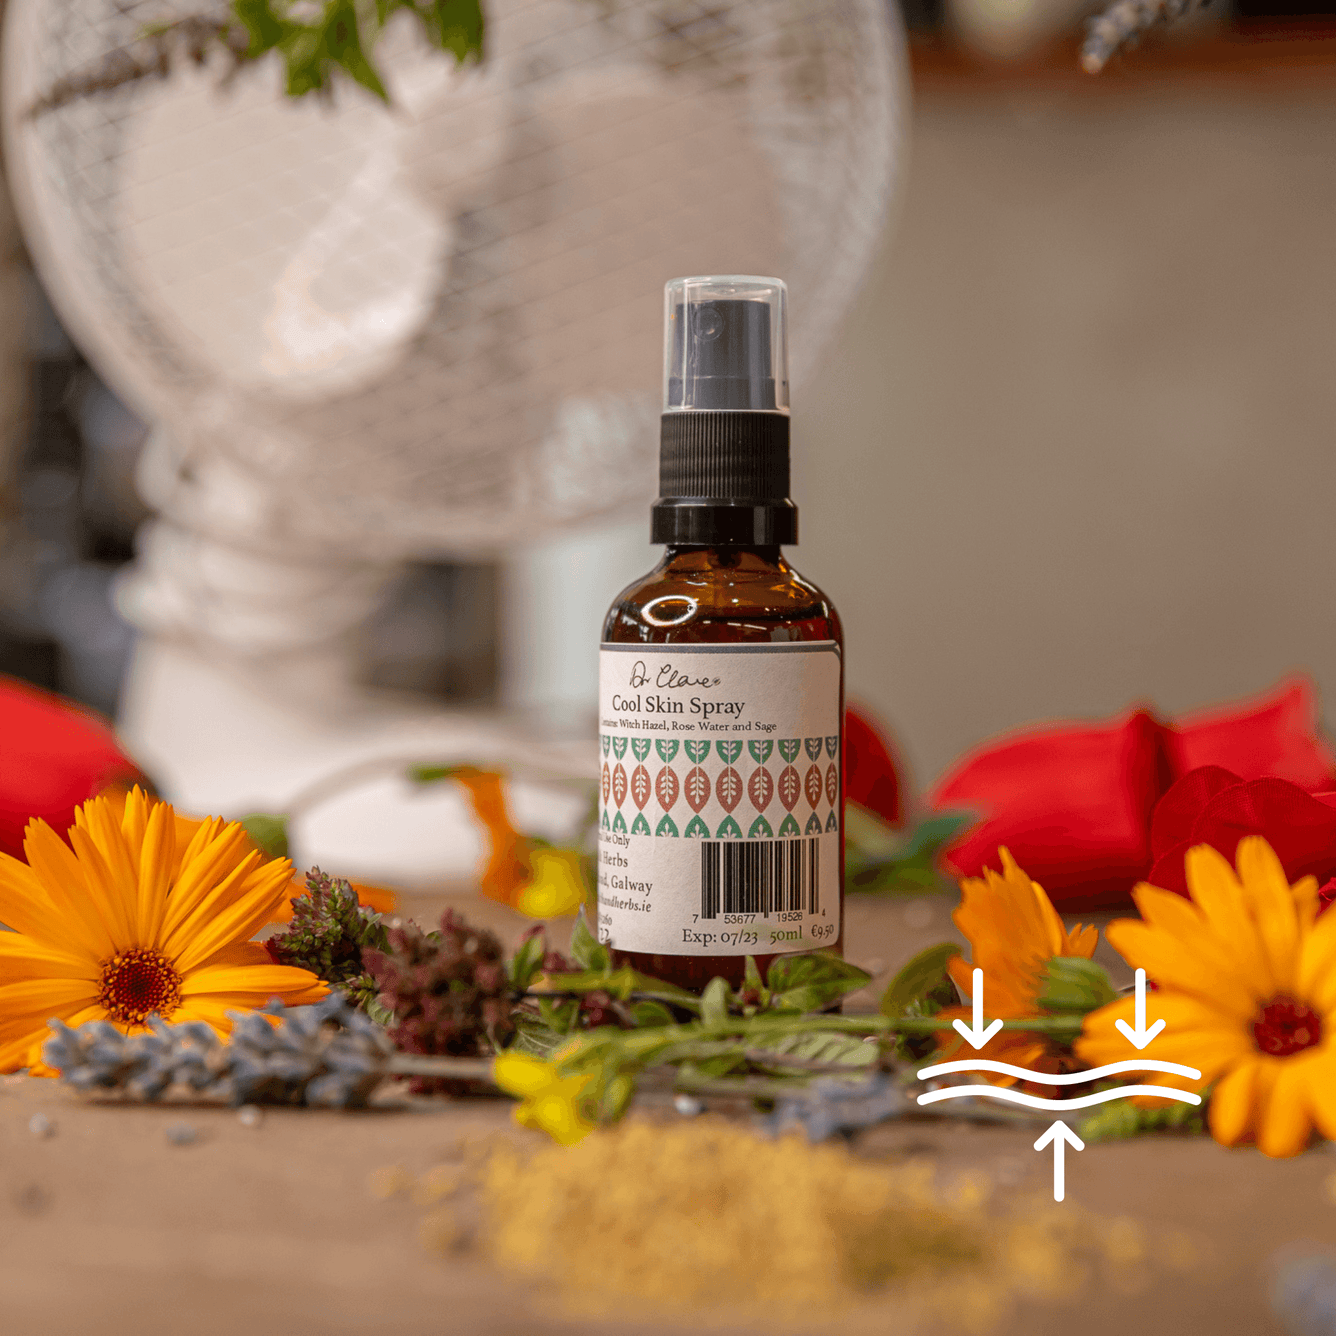 Cooling Spray - DrClareApothecary